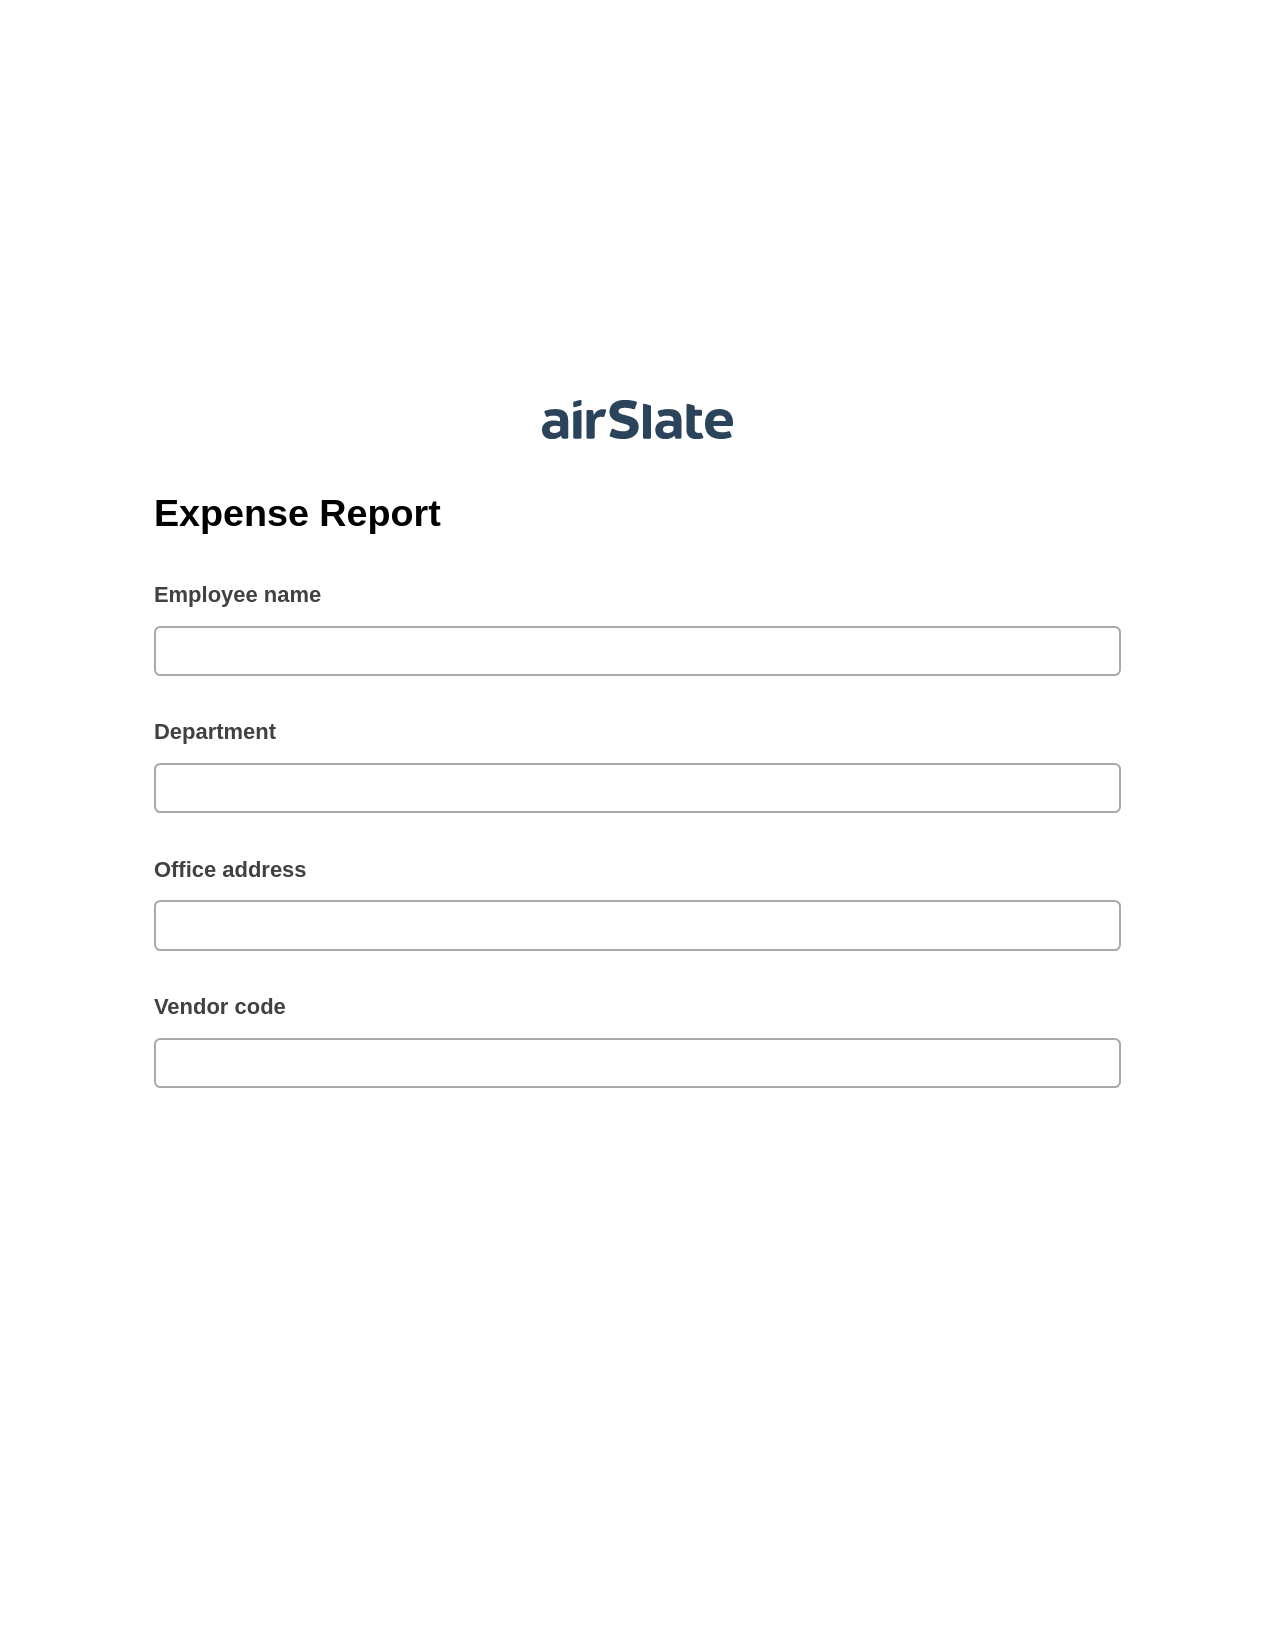 Multirole Expense Report Pre-fill Dropdown from Airtable, SendGrid send Campaign bot, Archive to SharePoint Folder Bot